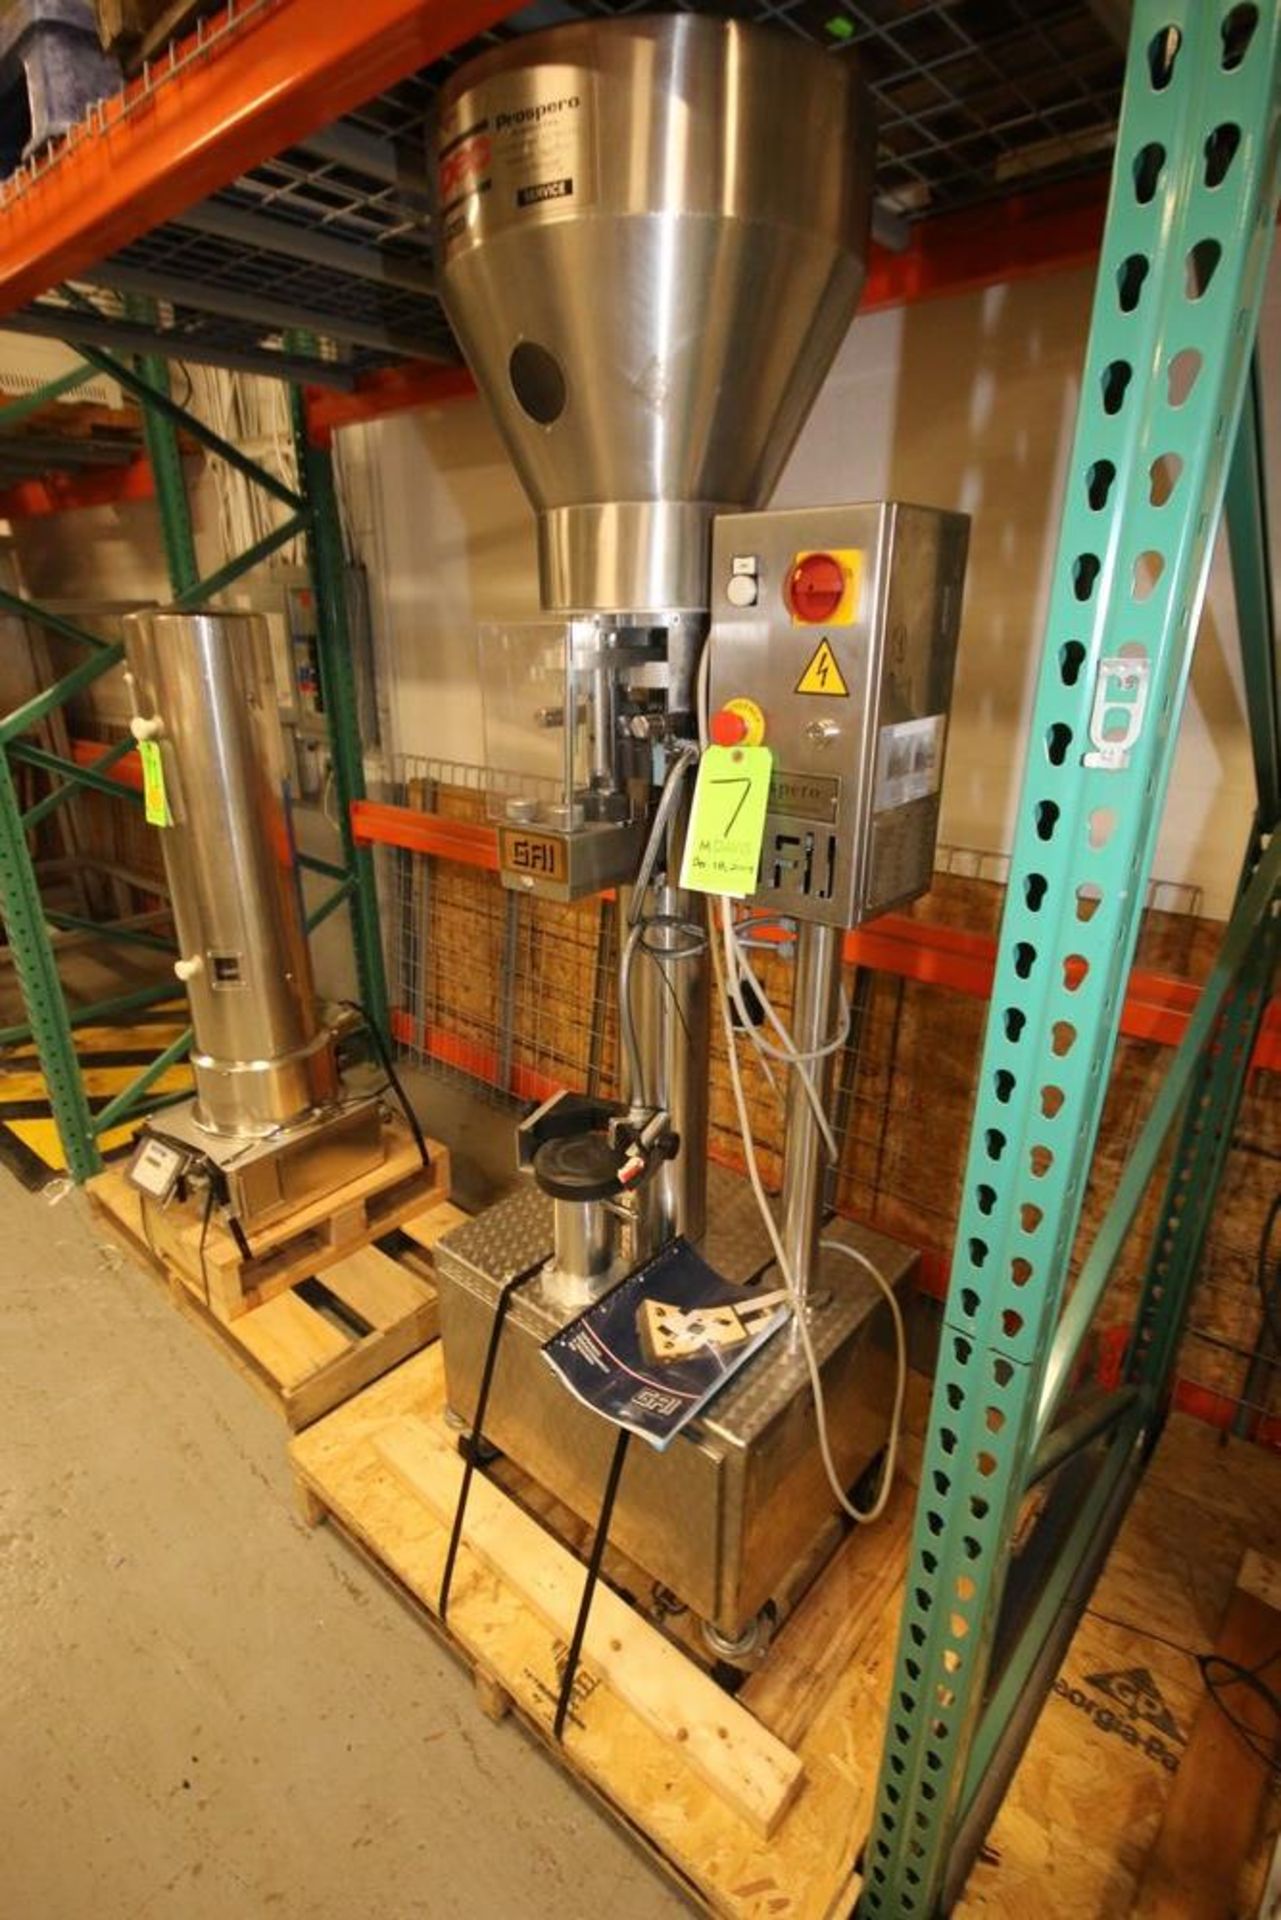 GAI / Prospero (PEC) Portable S/S Bottle Corker, 220 V, with Manual (Located in Pittsburgh, PA @ MDG - Image 5 of 6